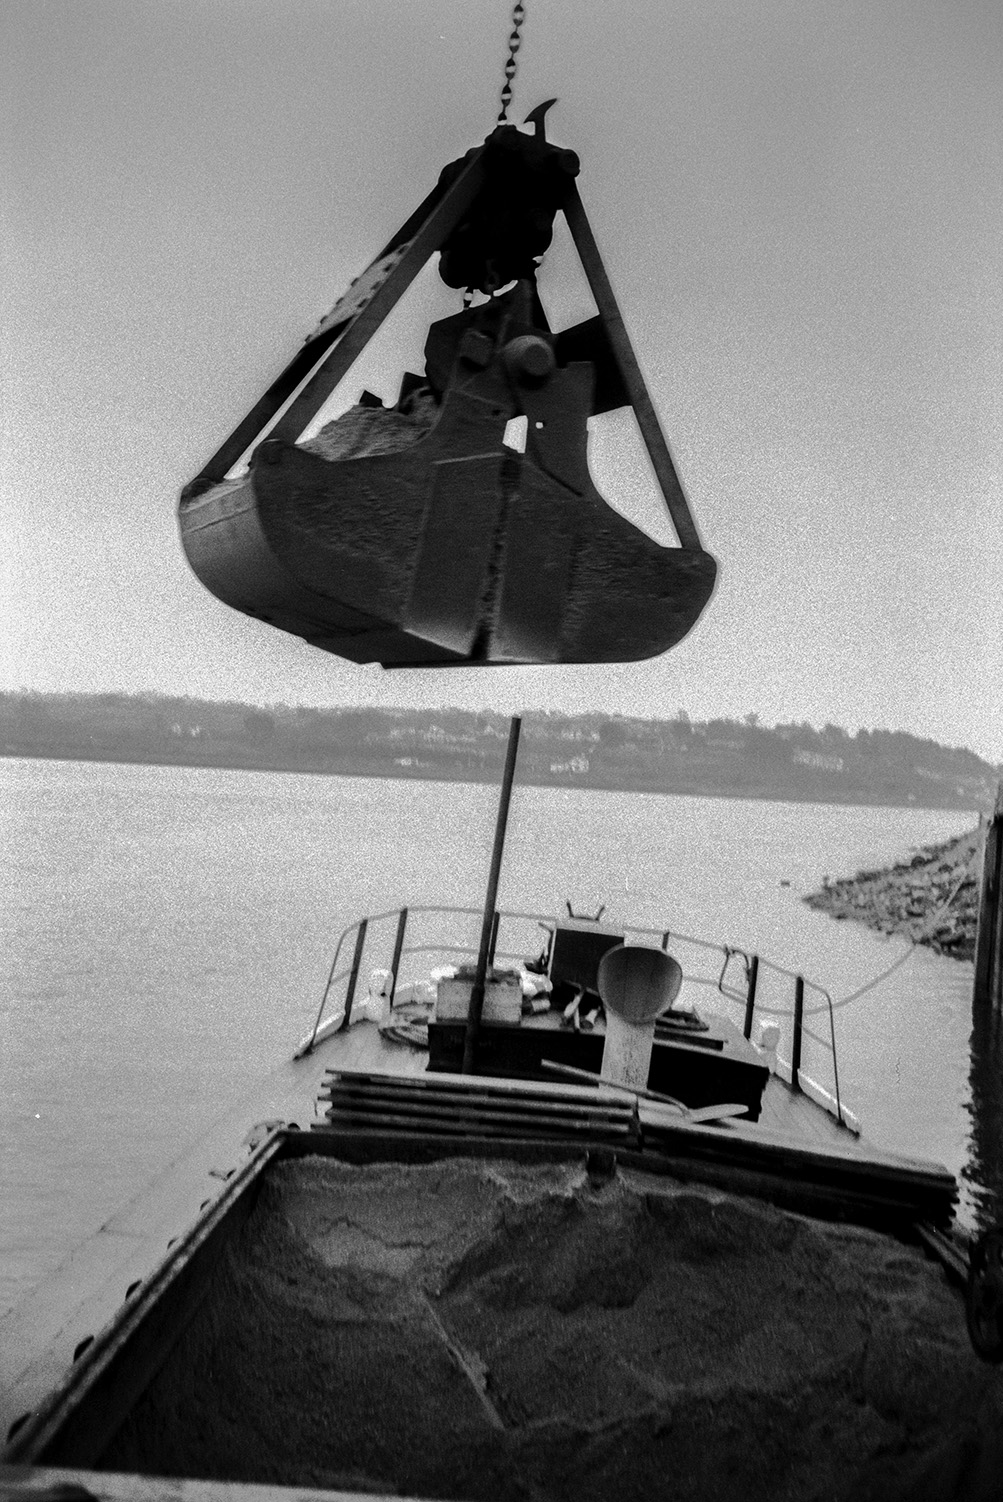 The mechanical grab of a crane unloading sand from a barge onto a dockside, possibly on the Taw River estuary.